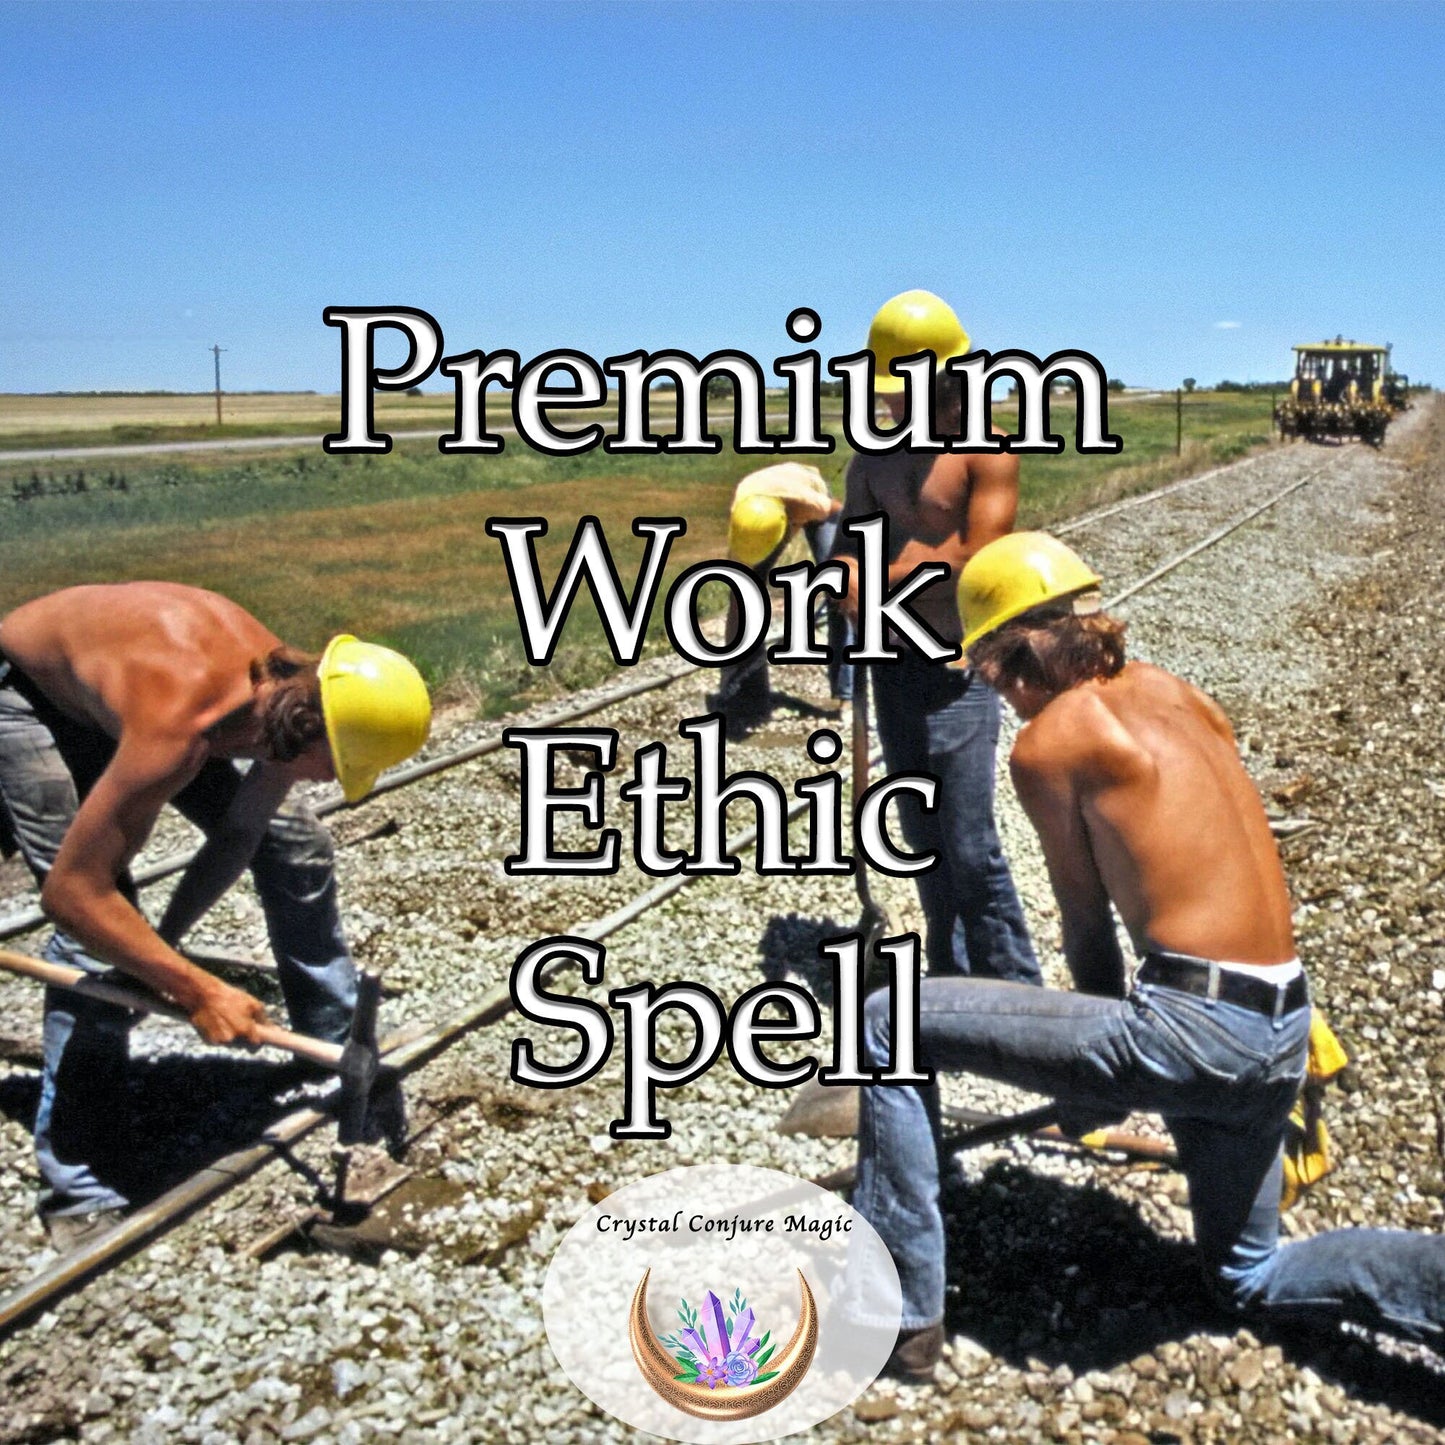 Premium Work Ethic Spell - gain invincible discipline, a relentless drive, and an unstoppable motivation